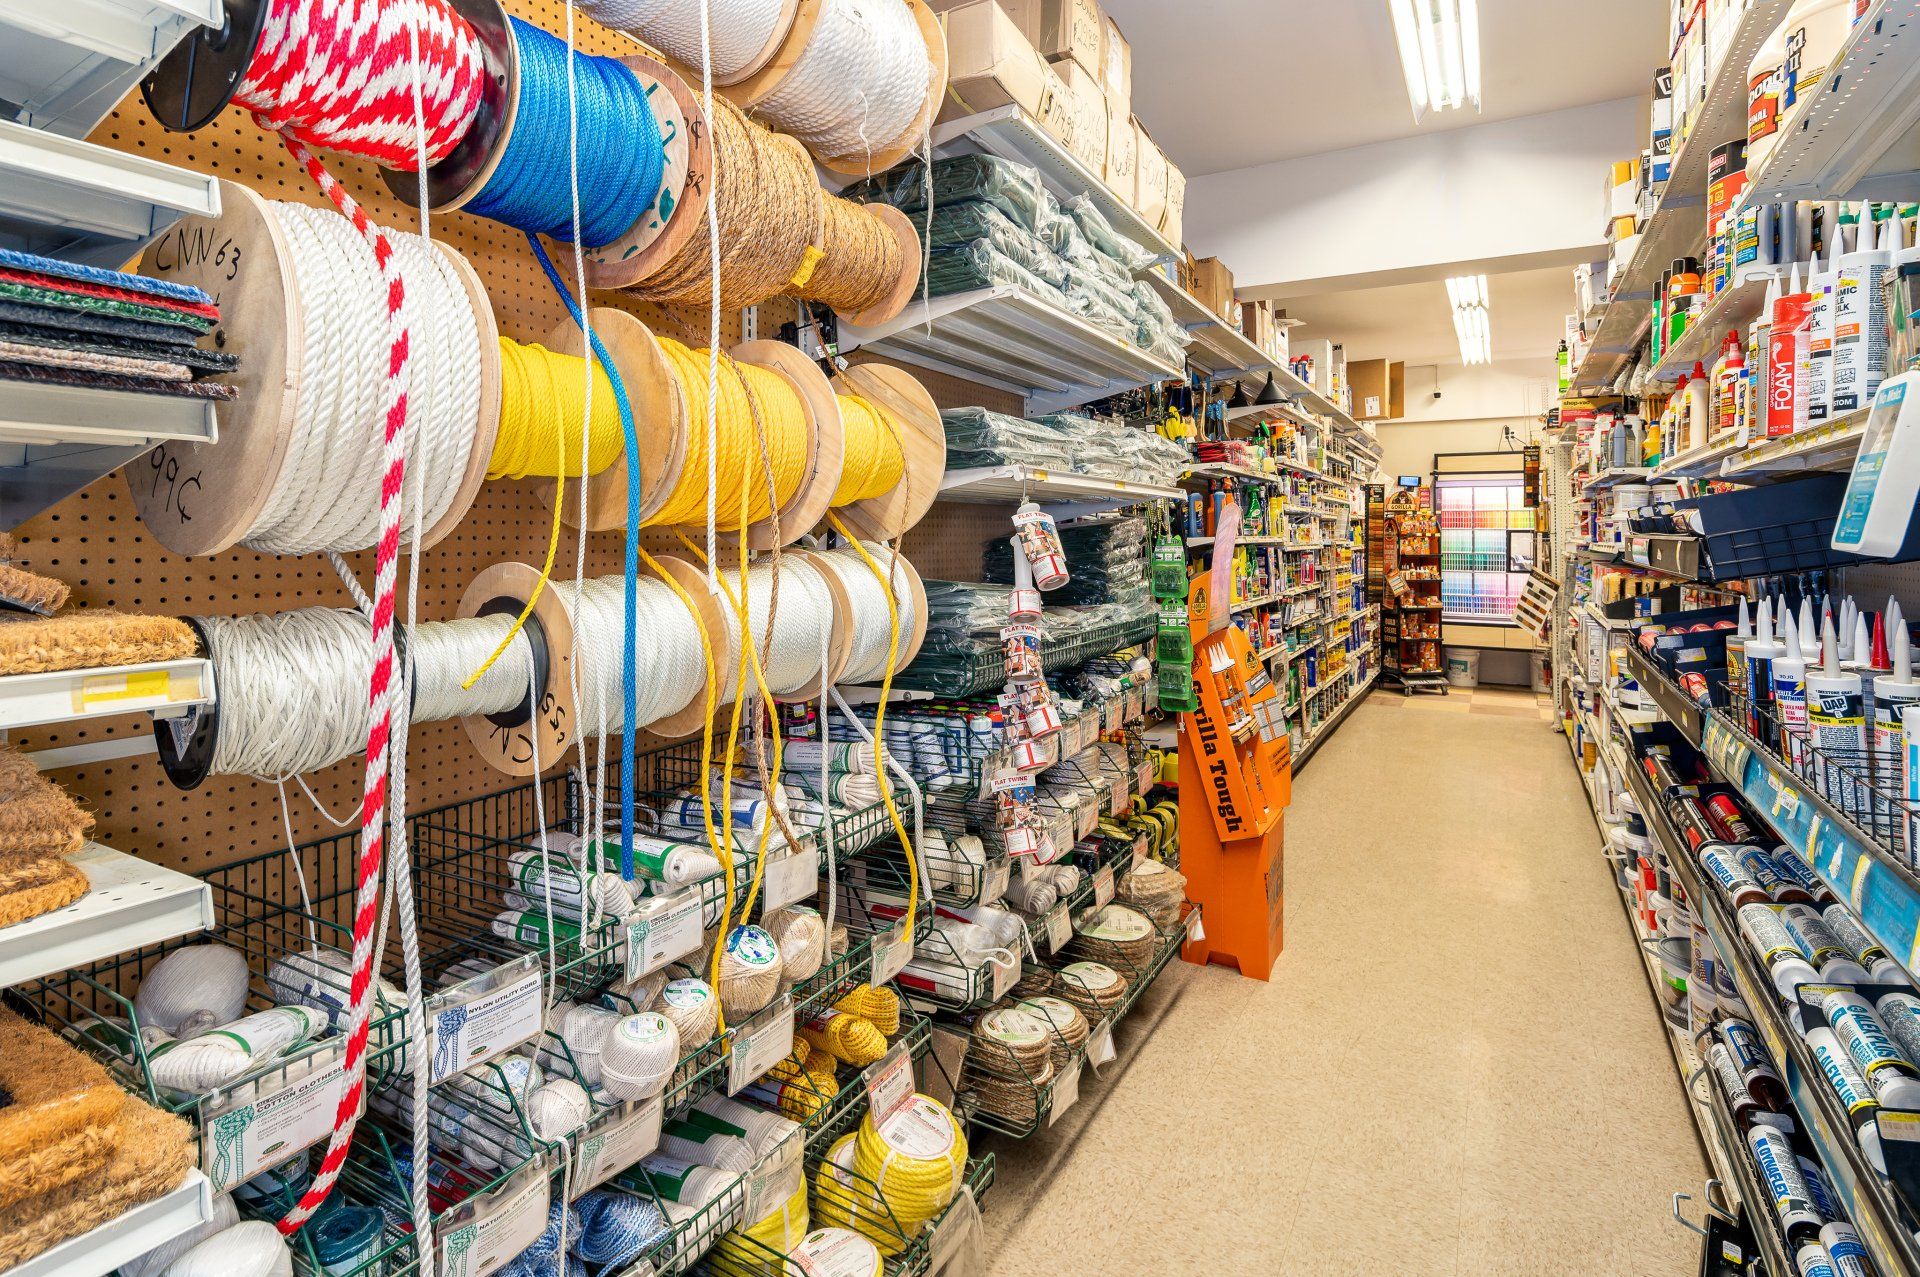 A store aisle filled with lots of rope and other items.